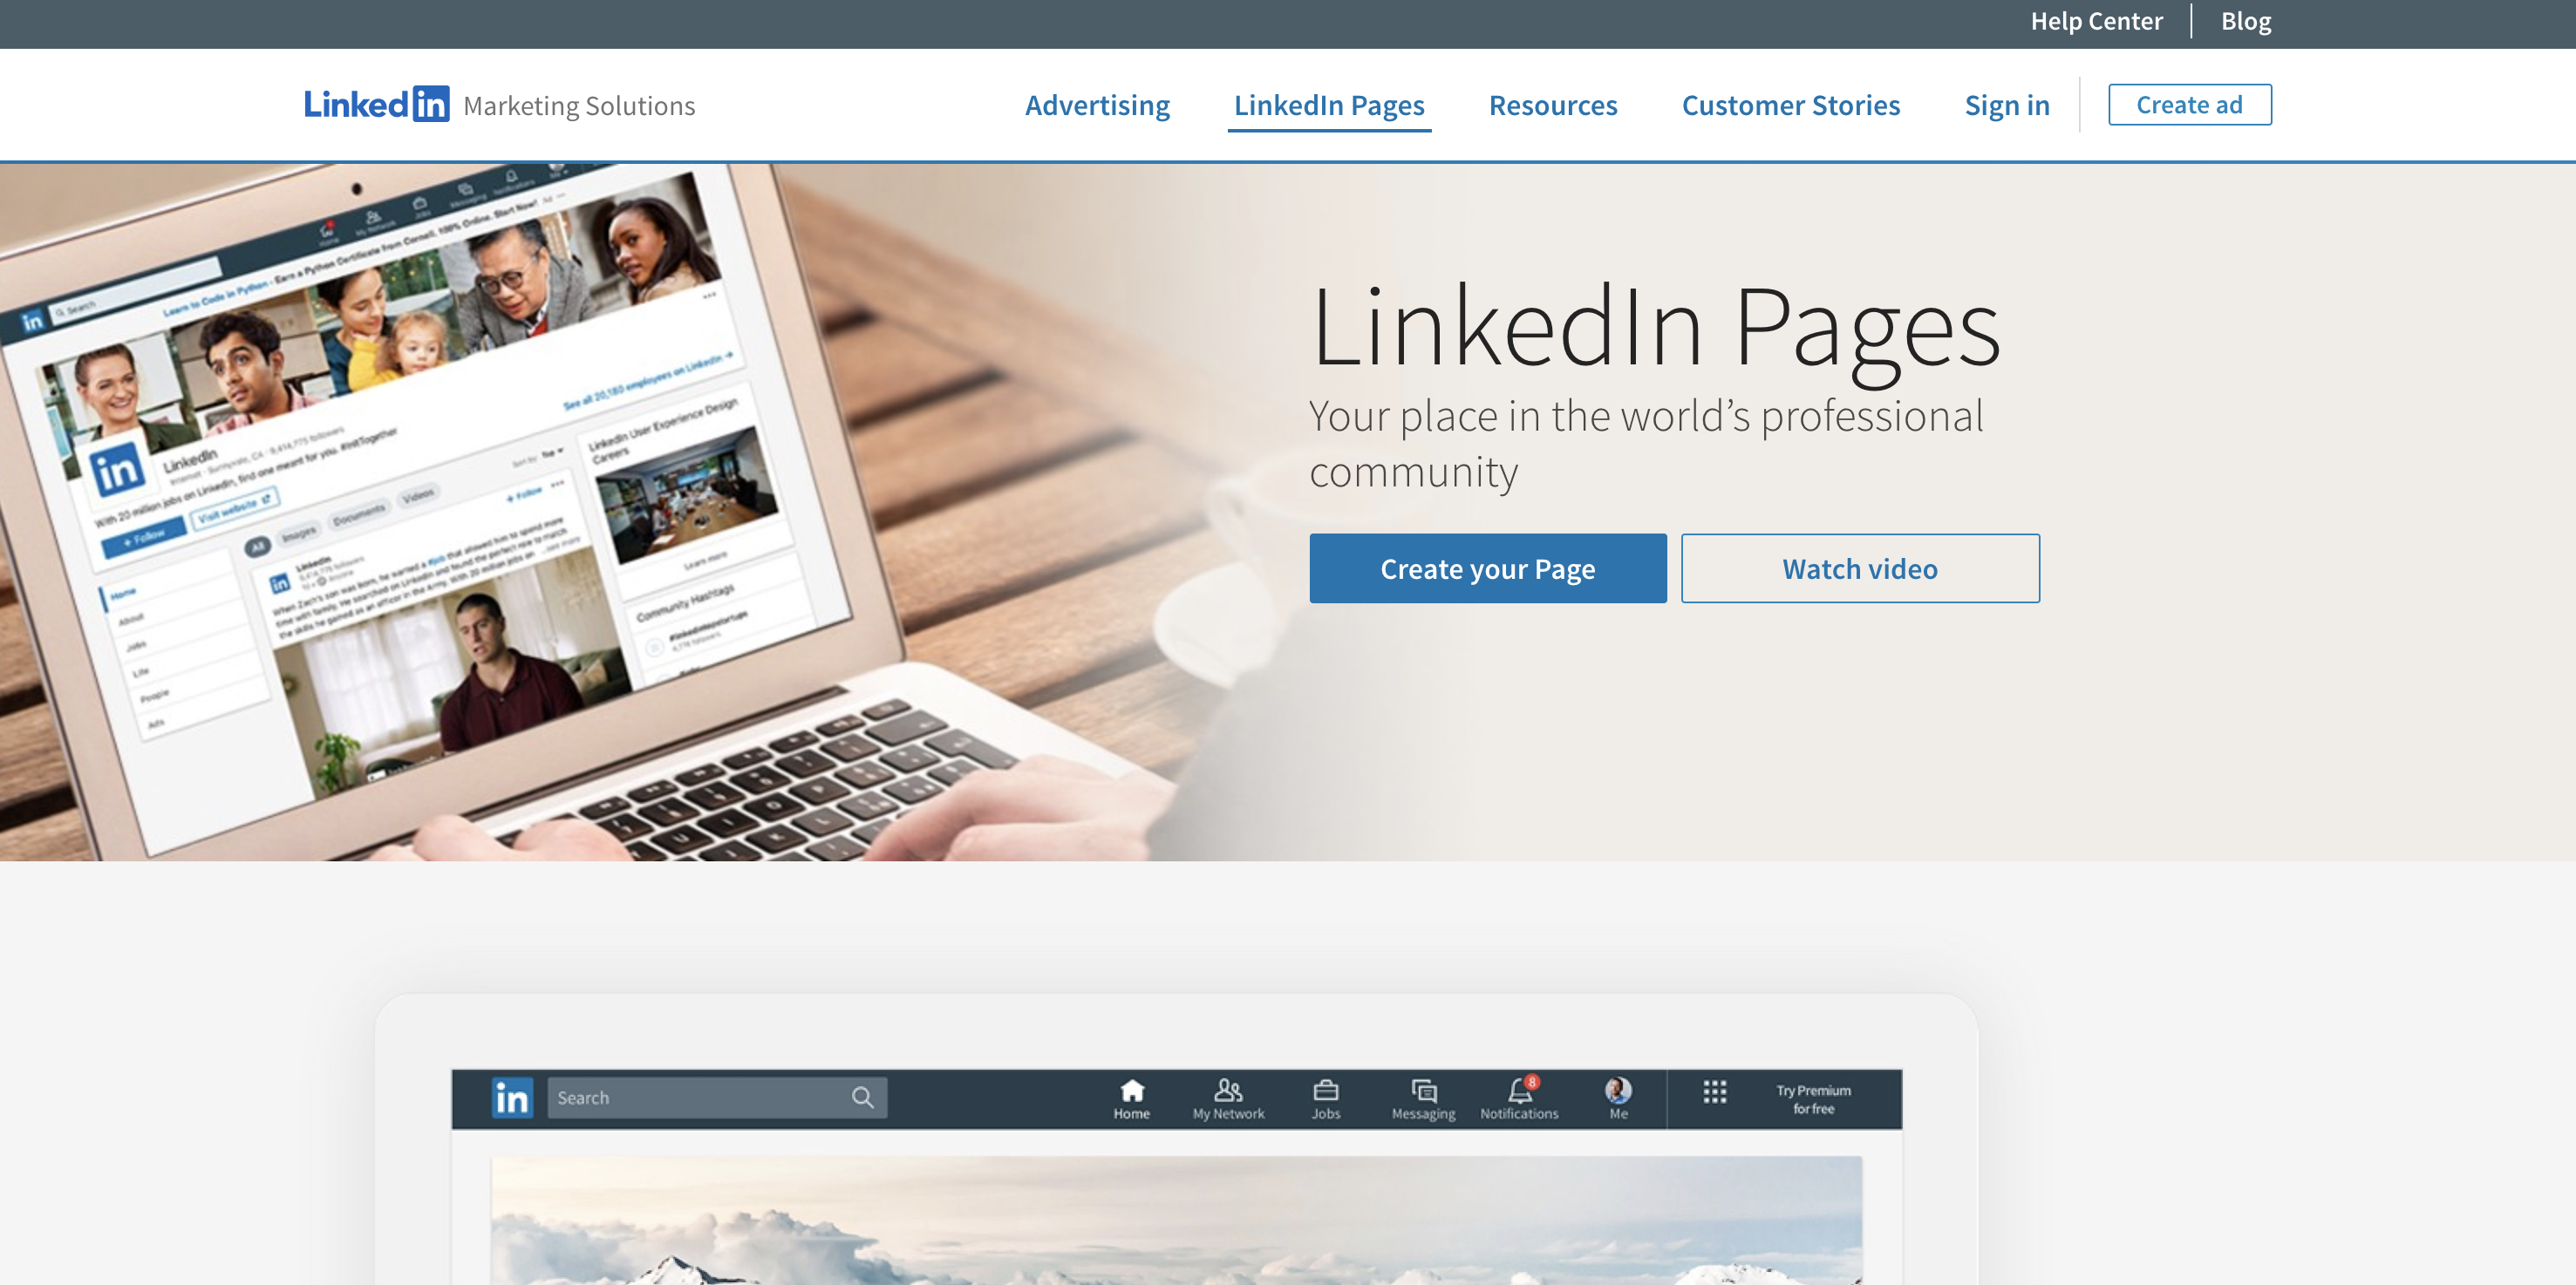 How to sign up for Linkedin business page